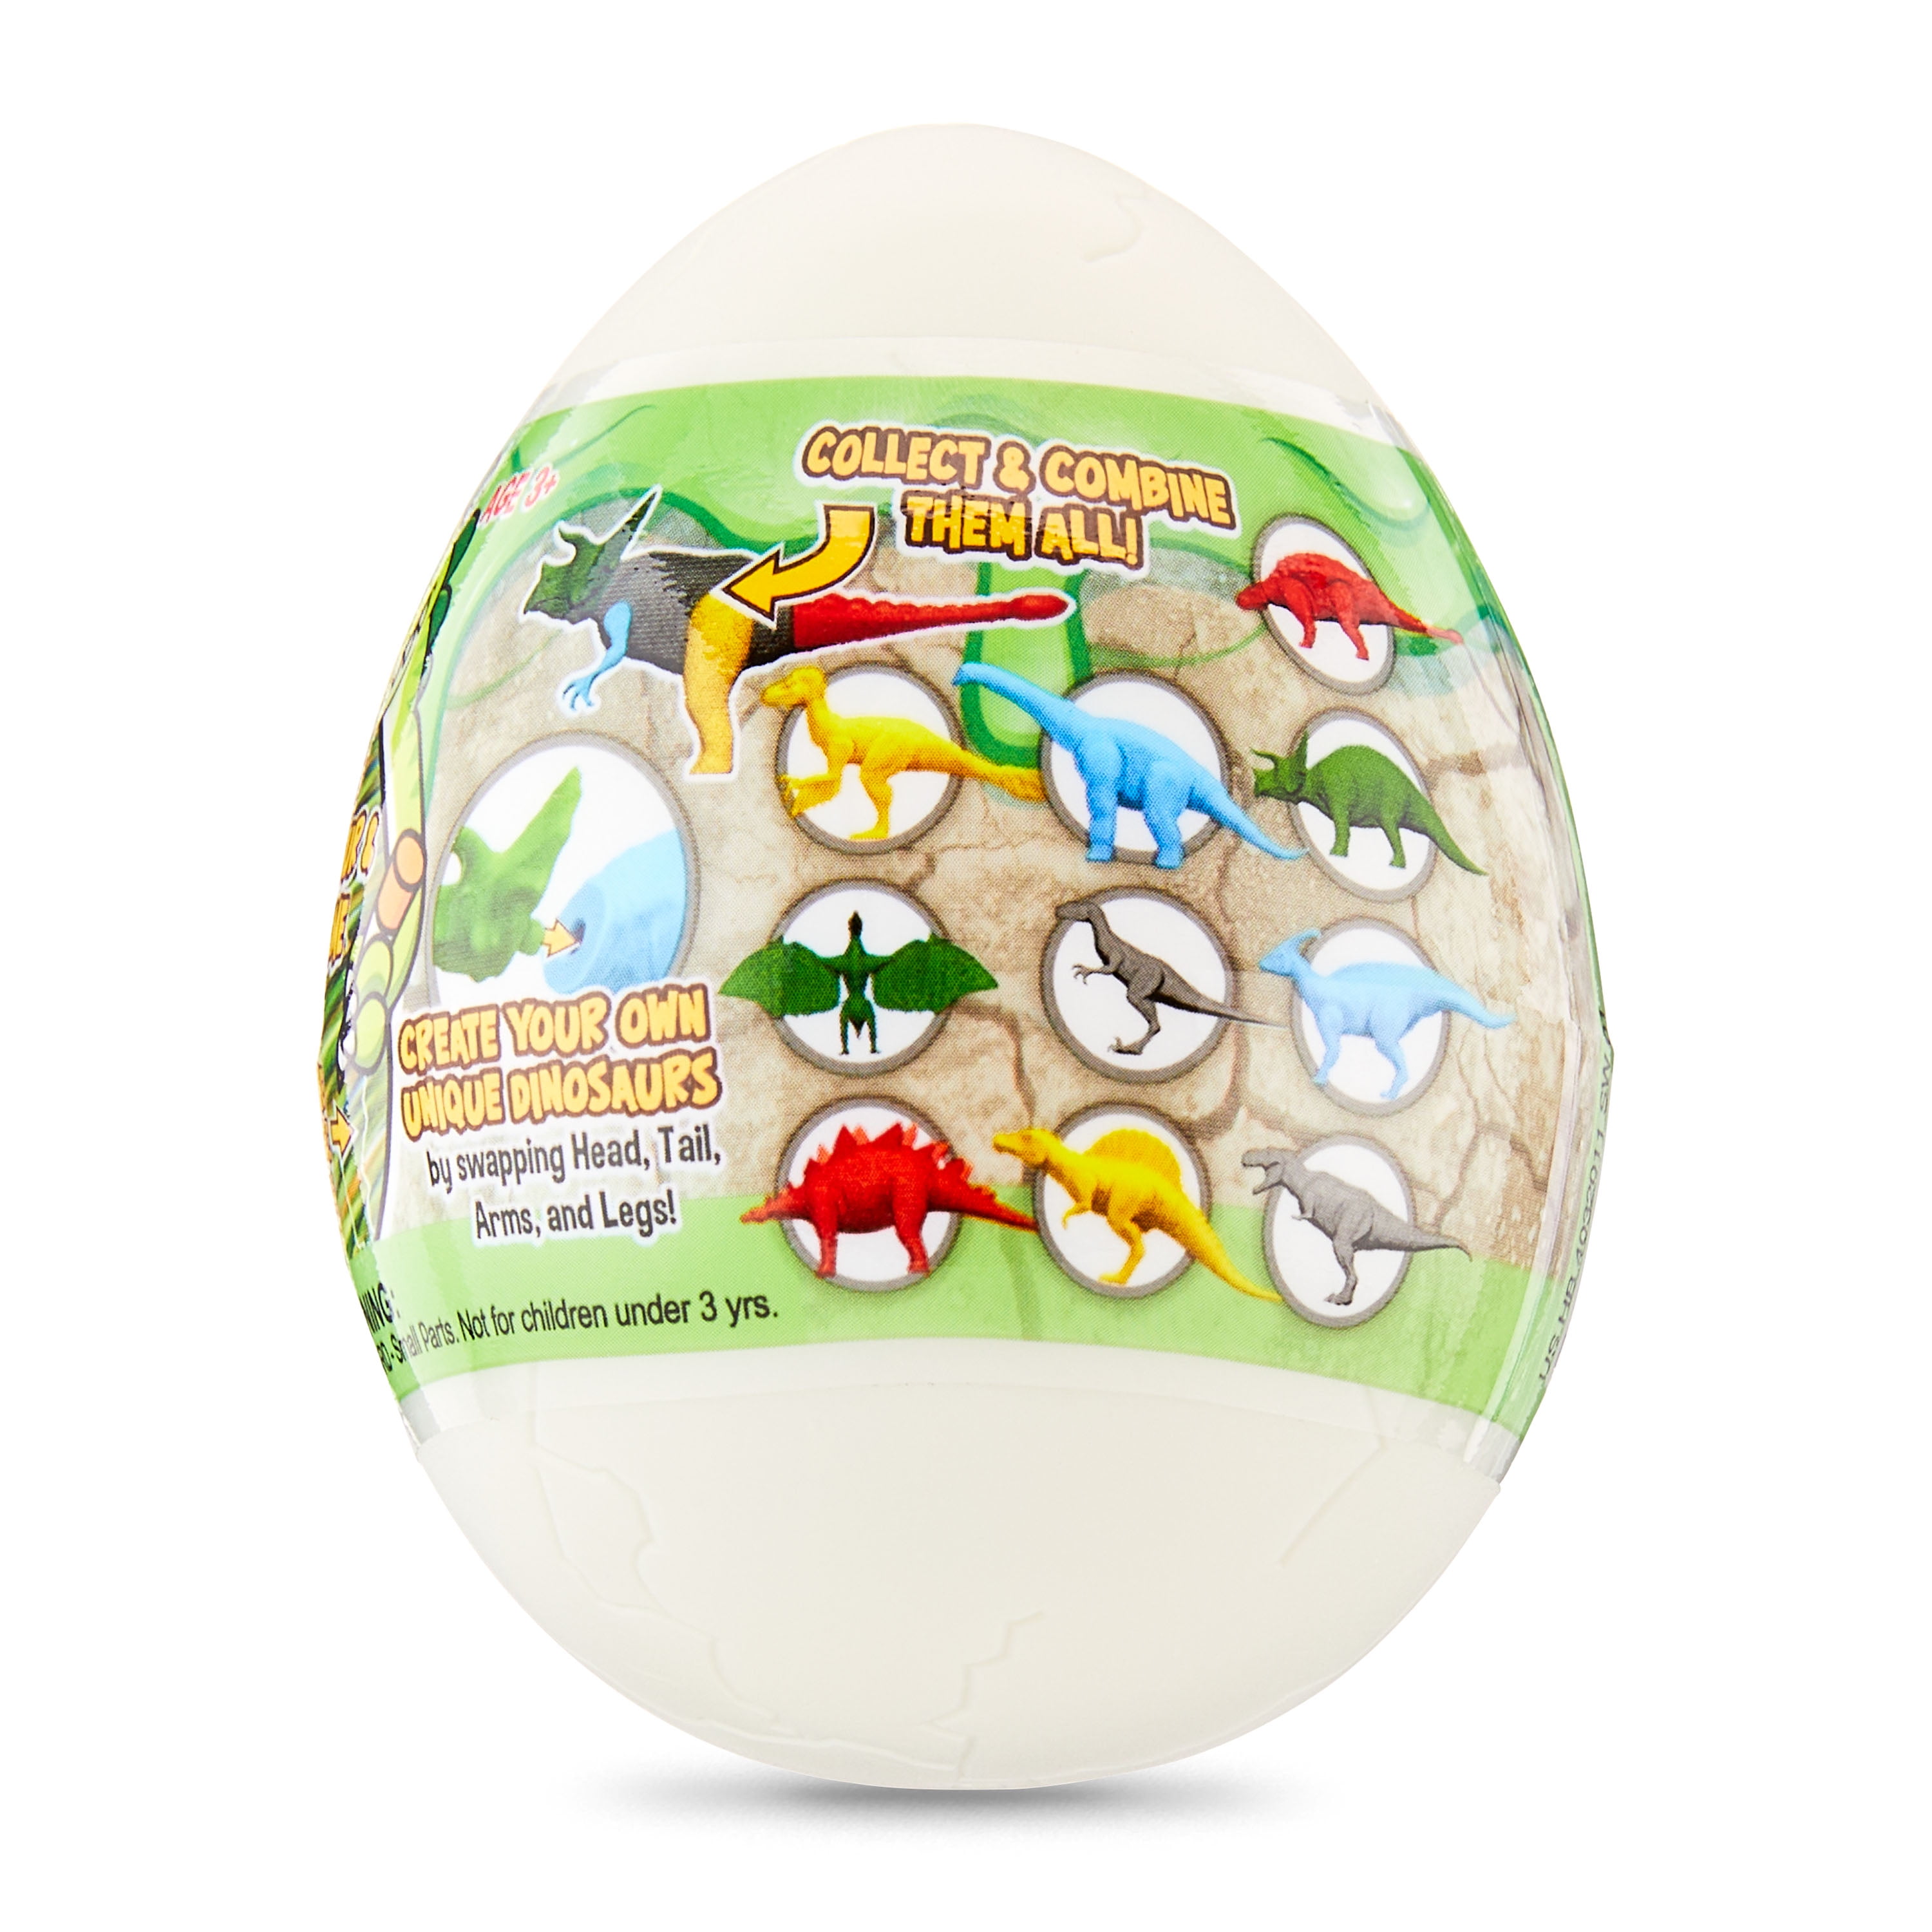 The Dinomazing Dinosaur Egg Refill - for The Dinomazing Egg Decorating Spinner by Eggmazing - Egg with Mystery Dinosaur and Non-Toxic Slime - 6 Eggs